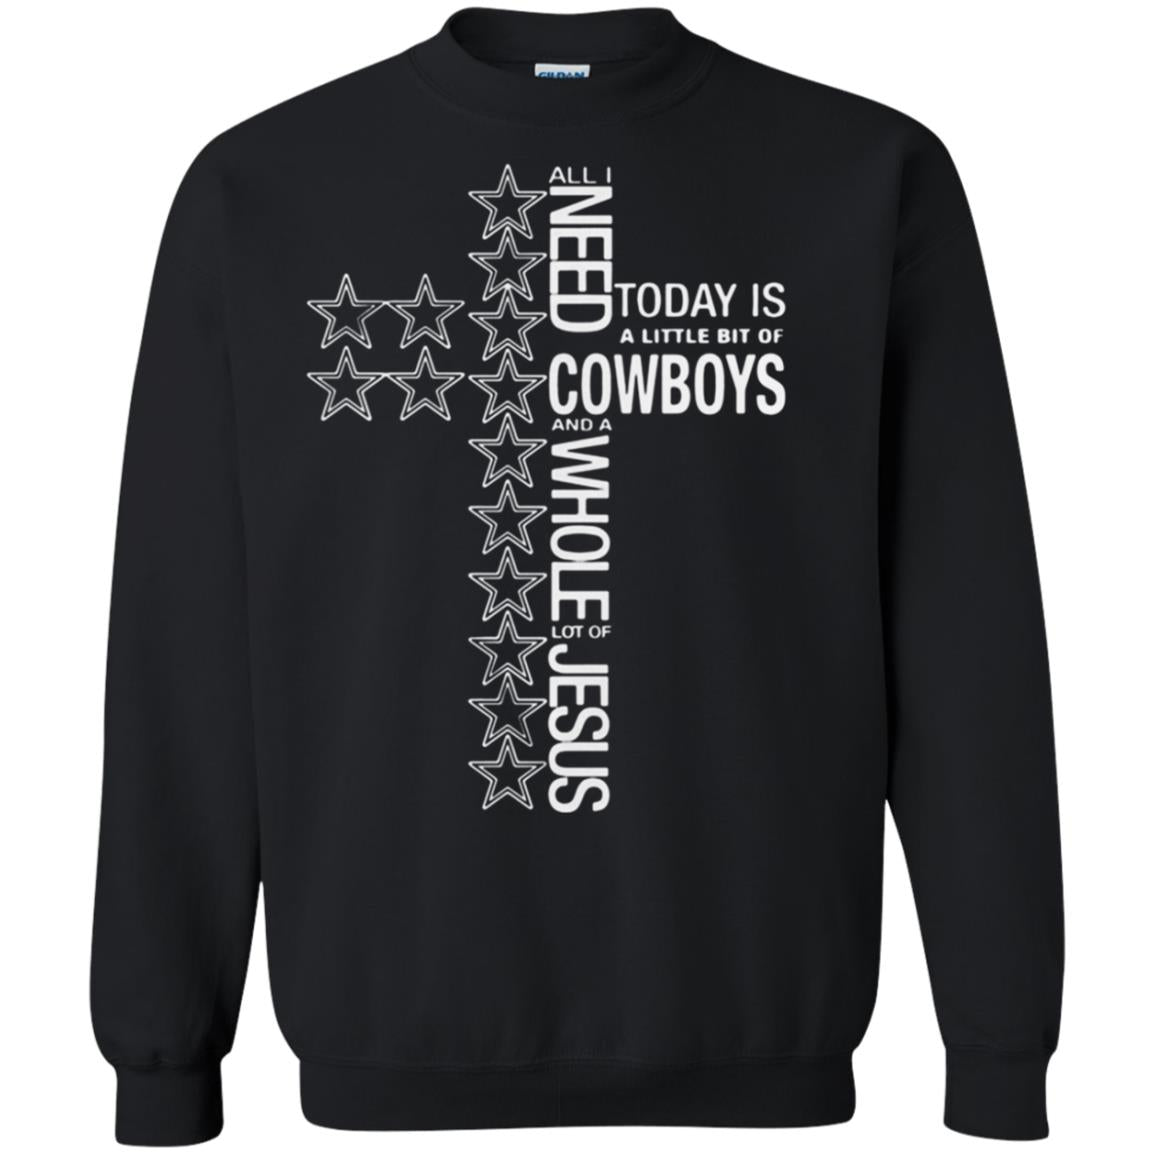 Nfl Dallas Cow Fans All I Need Today Is A Little Bit Of Cow And A Whole Lot Of Jesus Gift T Shirt